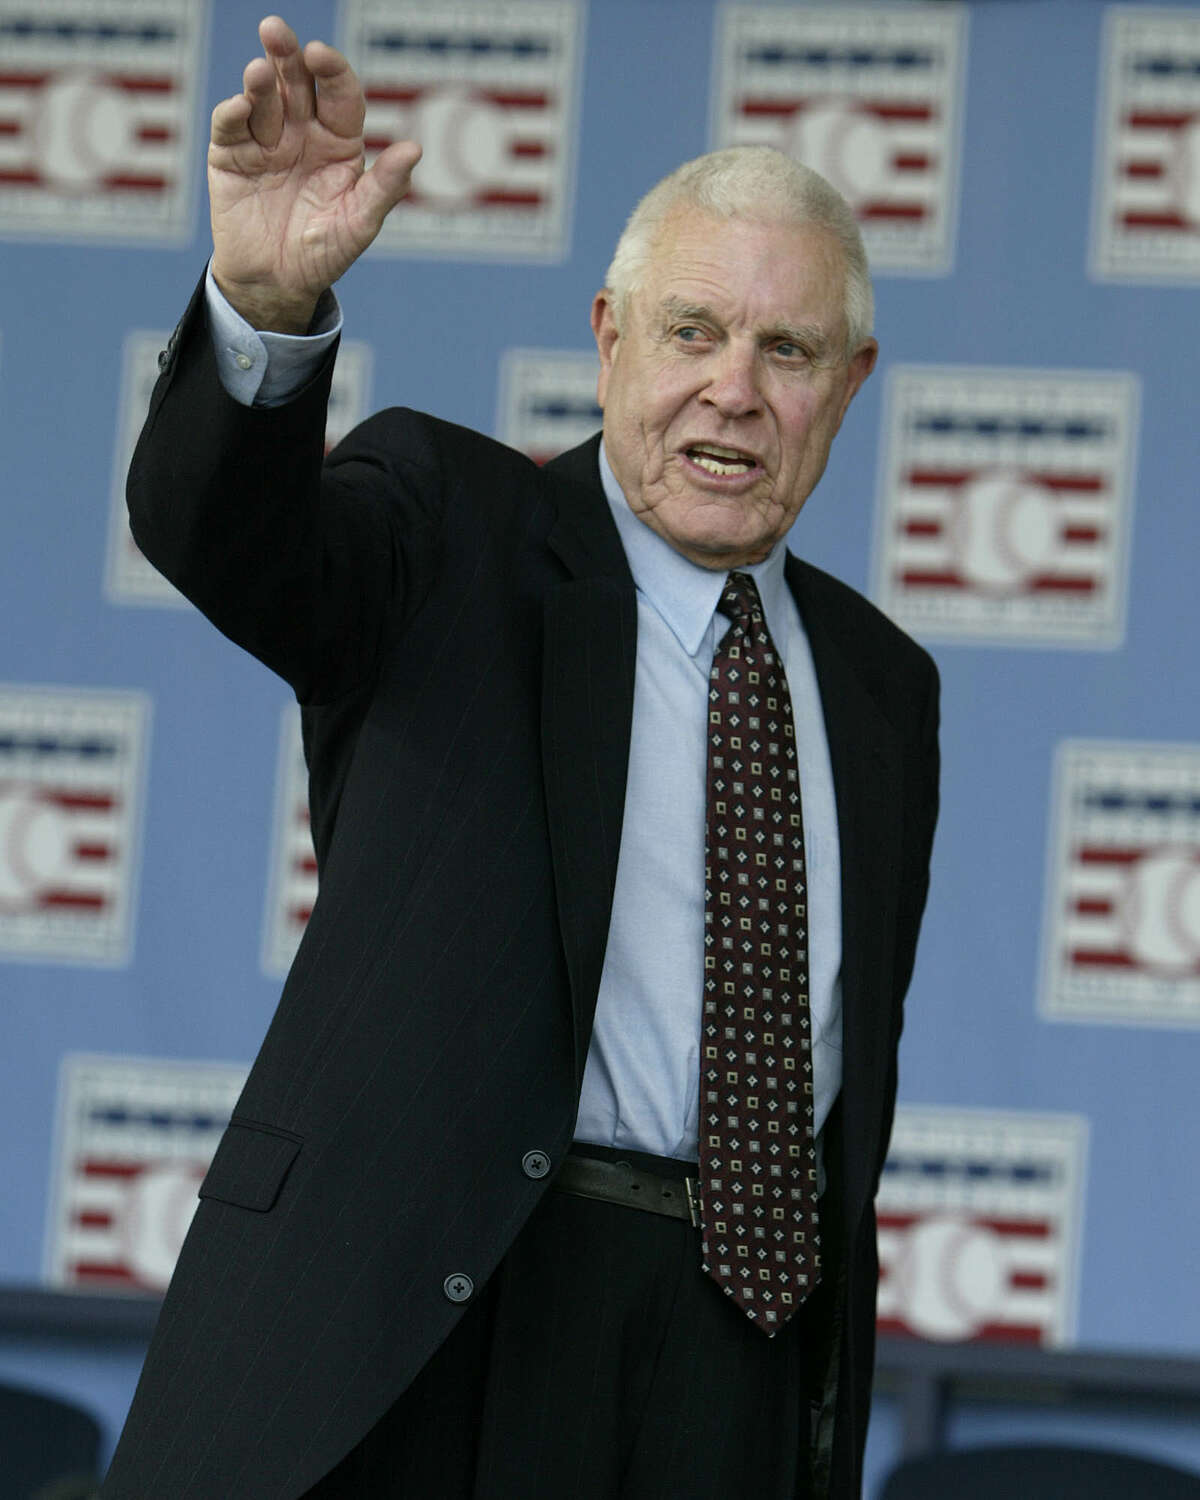 Broadcaster Lon Simmons, the longtime voice of baseball in the San Francisco Bay area, waves at the end of the 2004 National Baseball Hall of Fame induction ceremonies Sunday, July 25, 2004 in Cooperstown, N.Y. Simmons is the recipient of the Ford C. Frick Award given annually to a baseball broadcaster. (AP Photo/John Dunn) Ran on: 07-26-2004 Photo caption Dummy text goes here. Dummy text goes here. Dummy text goes here. Dummy text goes here. Dummy text goes here. Dummy text goes here.Dummy text goes here. Dummy text goes here. Ran on: 07-26-2004 ProductNameChronicle